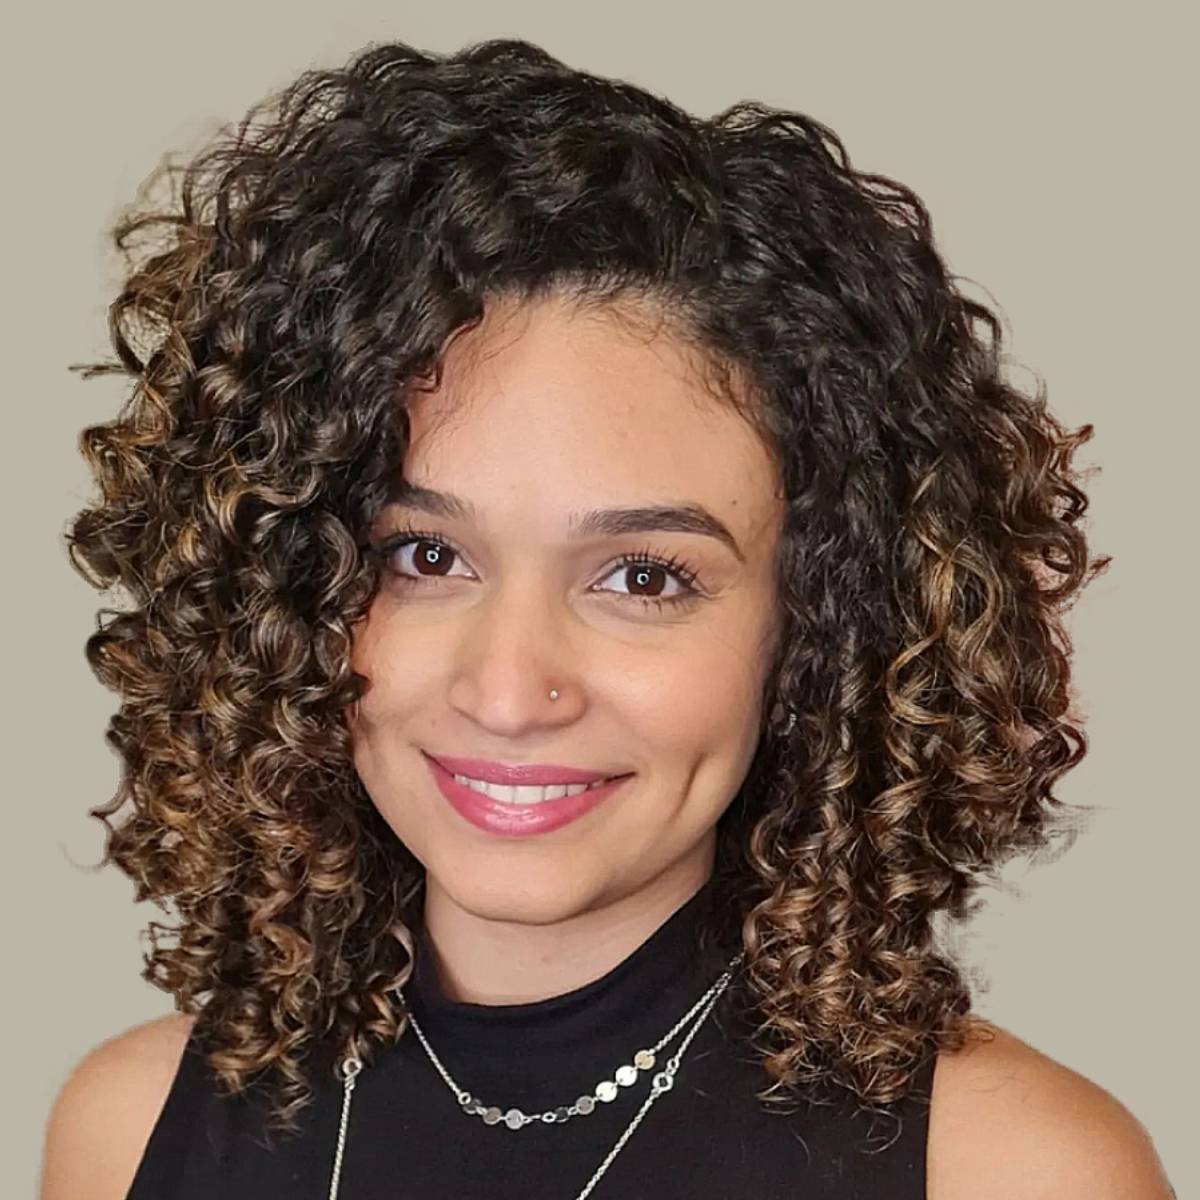 17 Curly Hairstyles For Every Hair Type, According to Pros